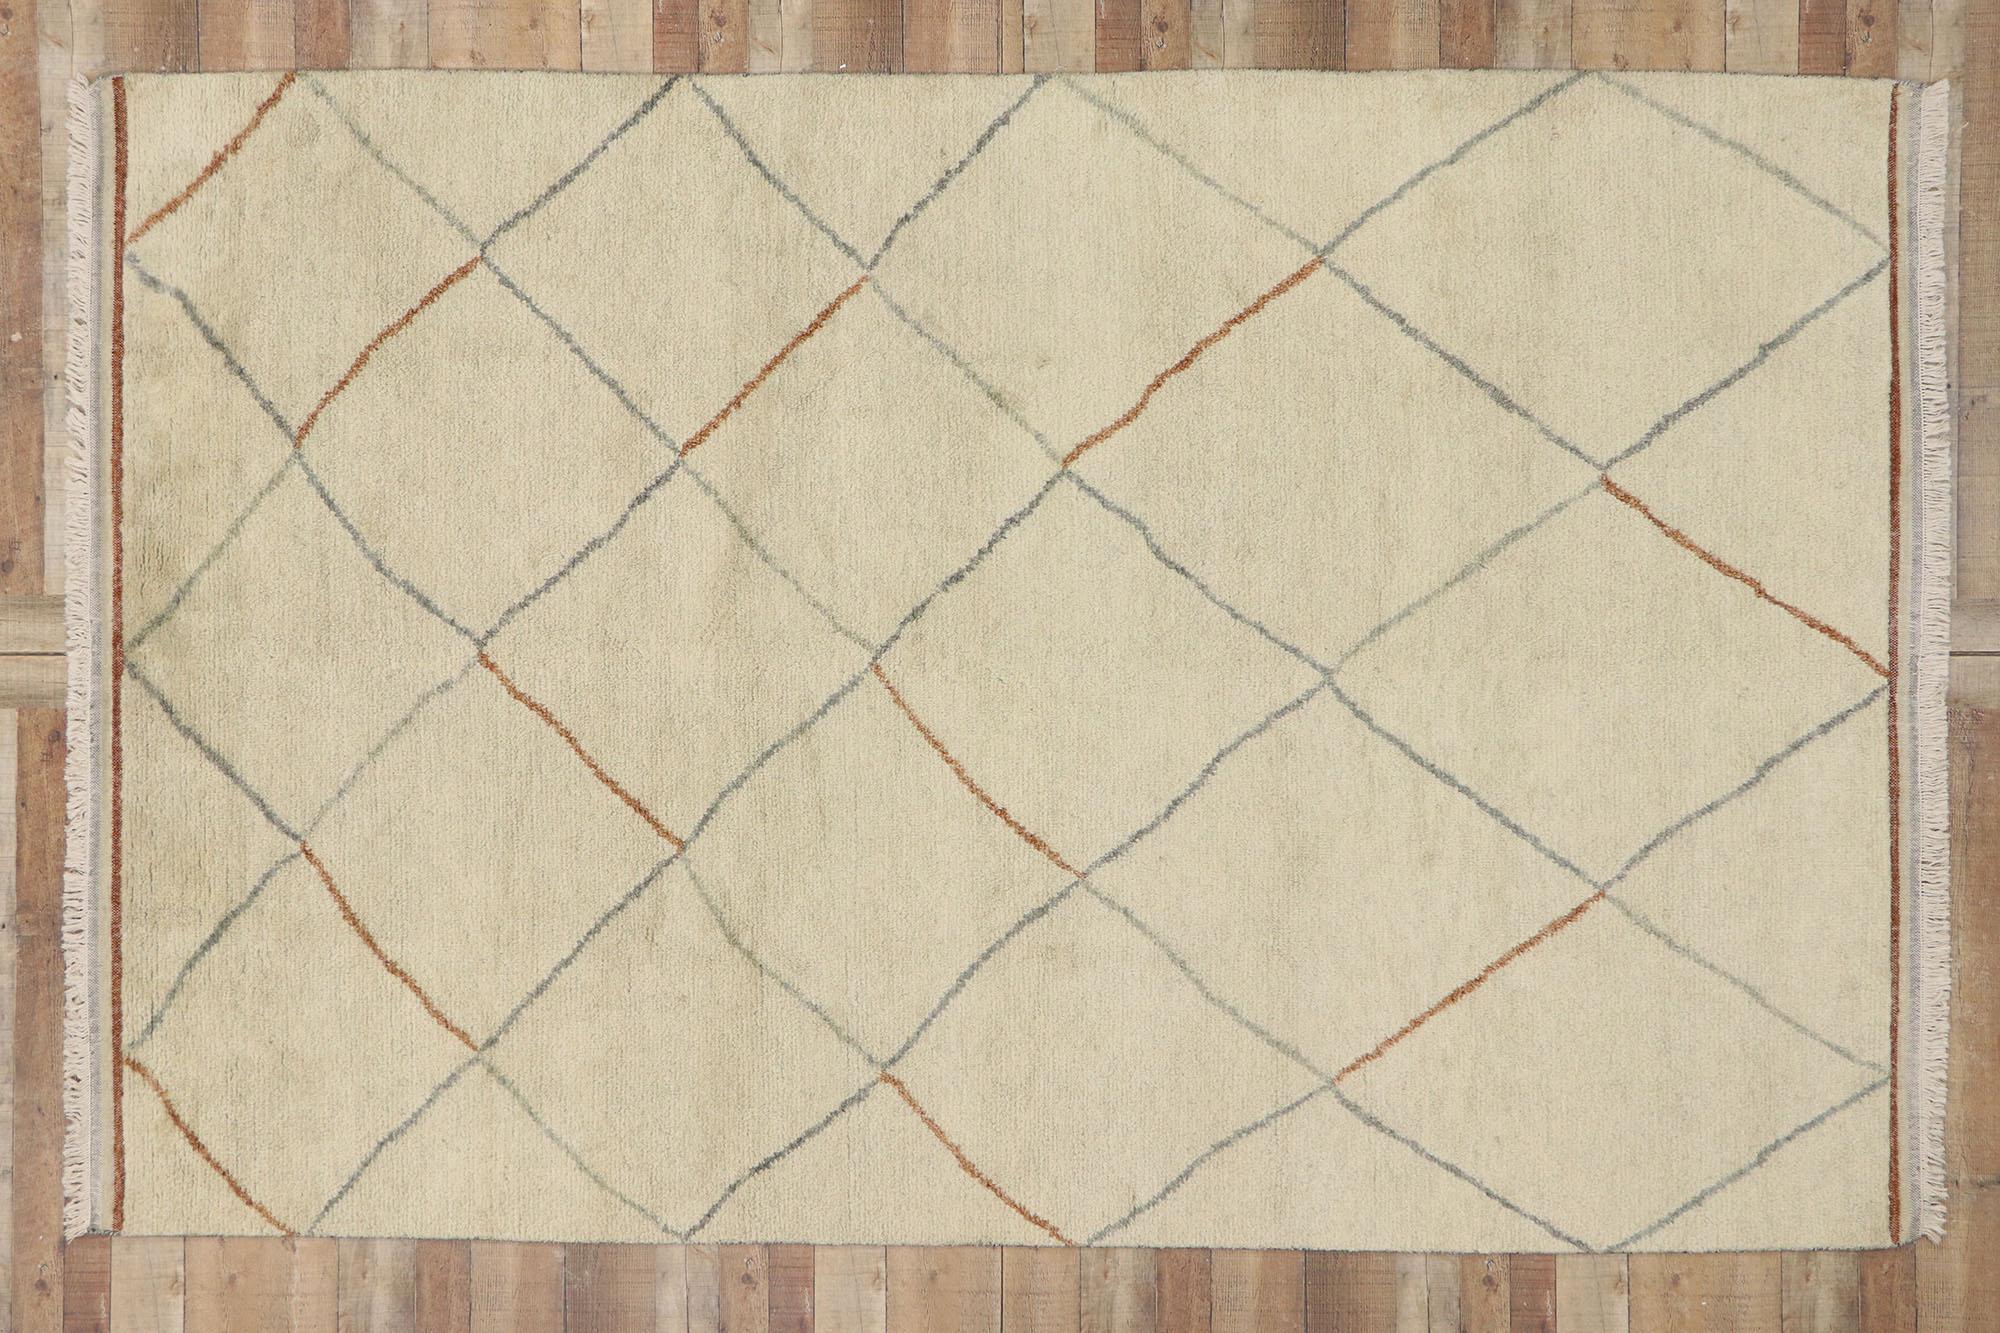 30588 New Contemporary Moroccan rug with Warm Minimalist style. This hand knotted wool new contemporary Moroccan rug features an all-over diamond lattice pattern spread across an abrashed ecru field. The lines of this piece gently cross one another